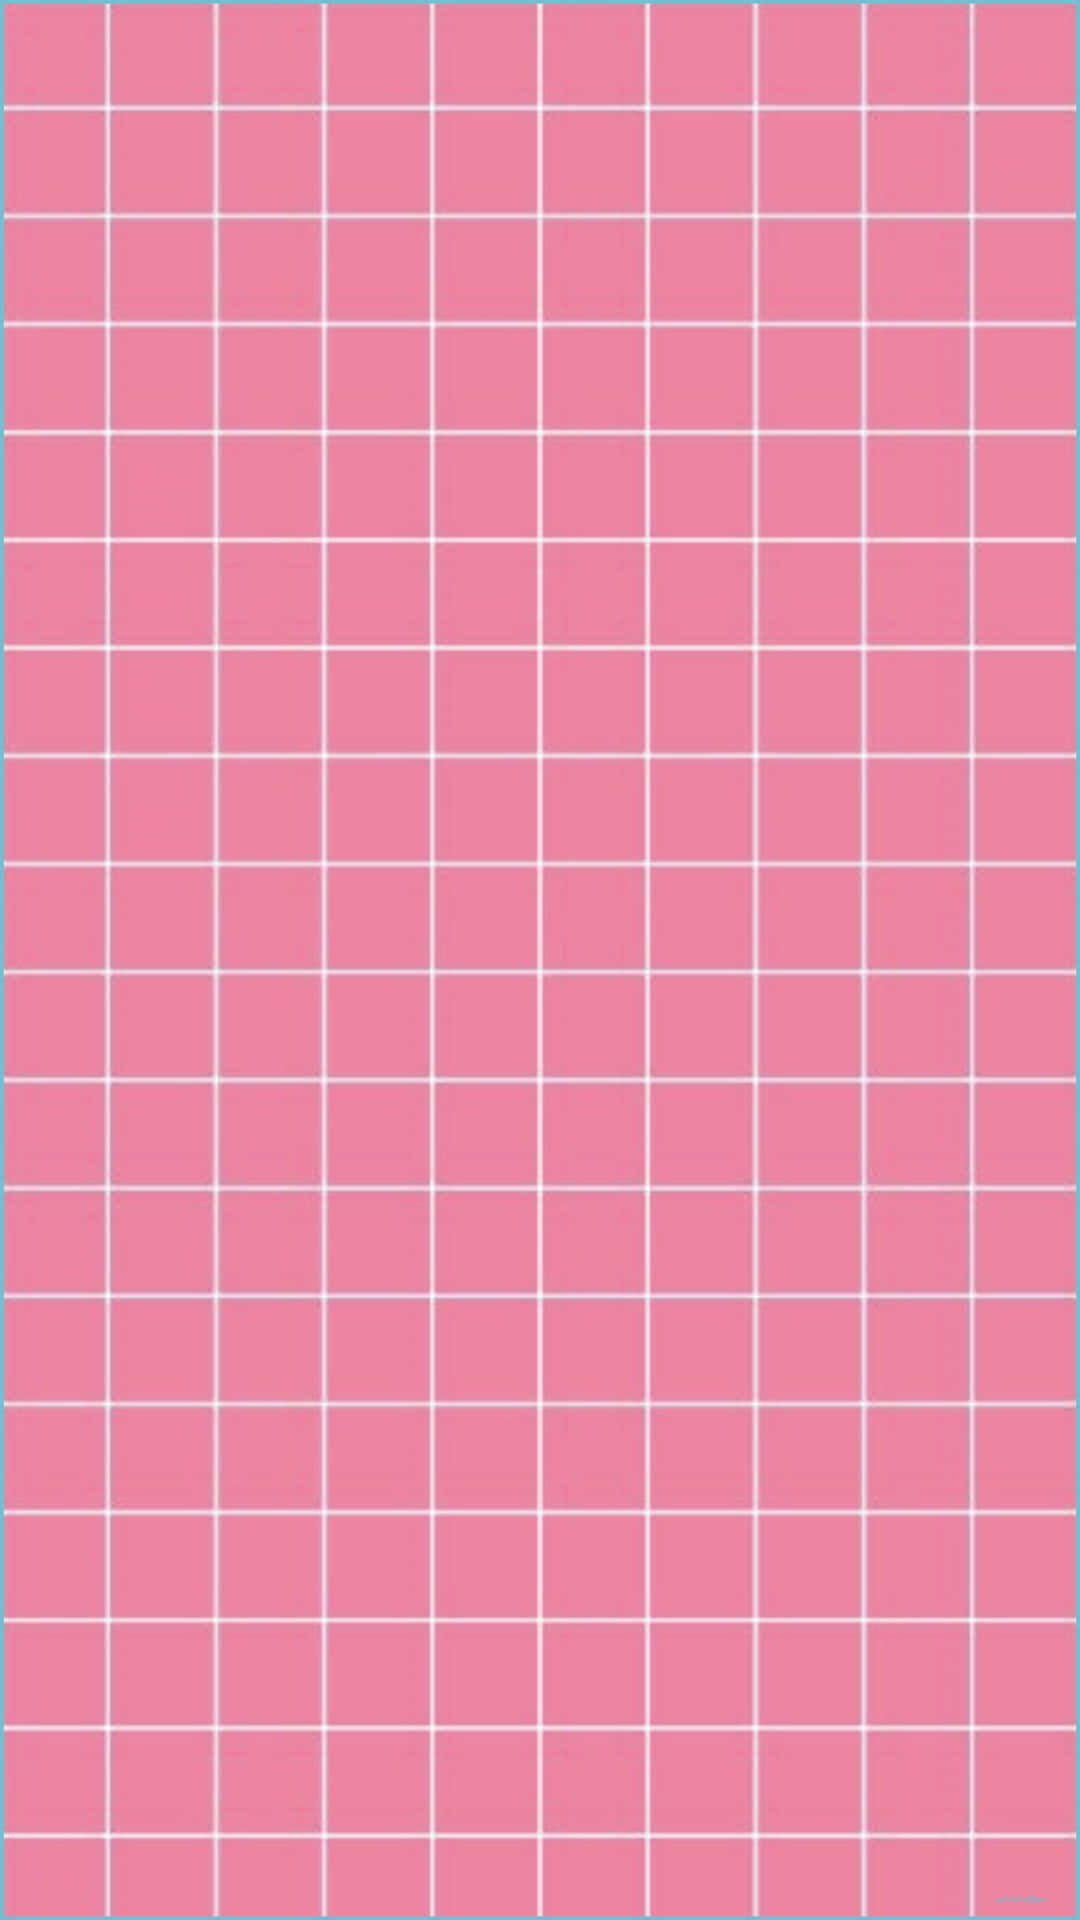 Bright Pink Grids for Your Modern Home Wallpaper